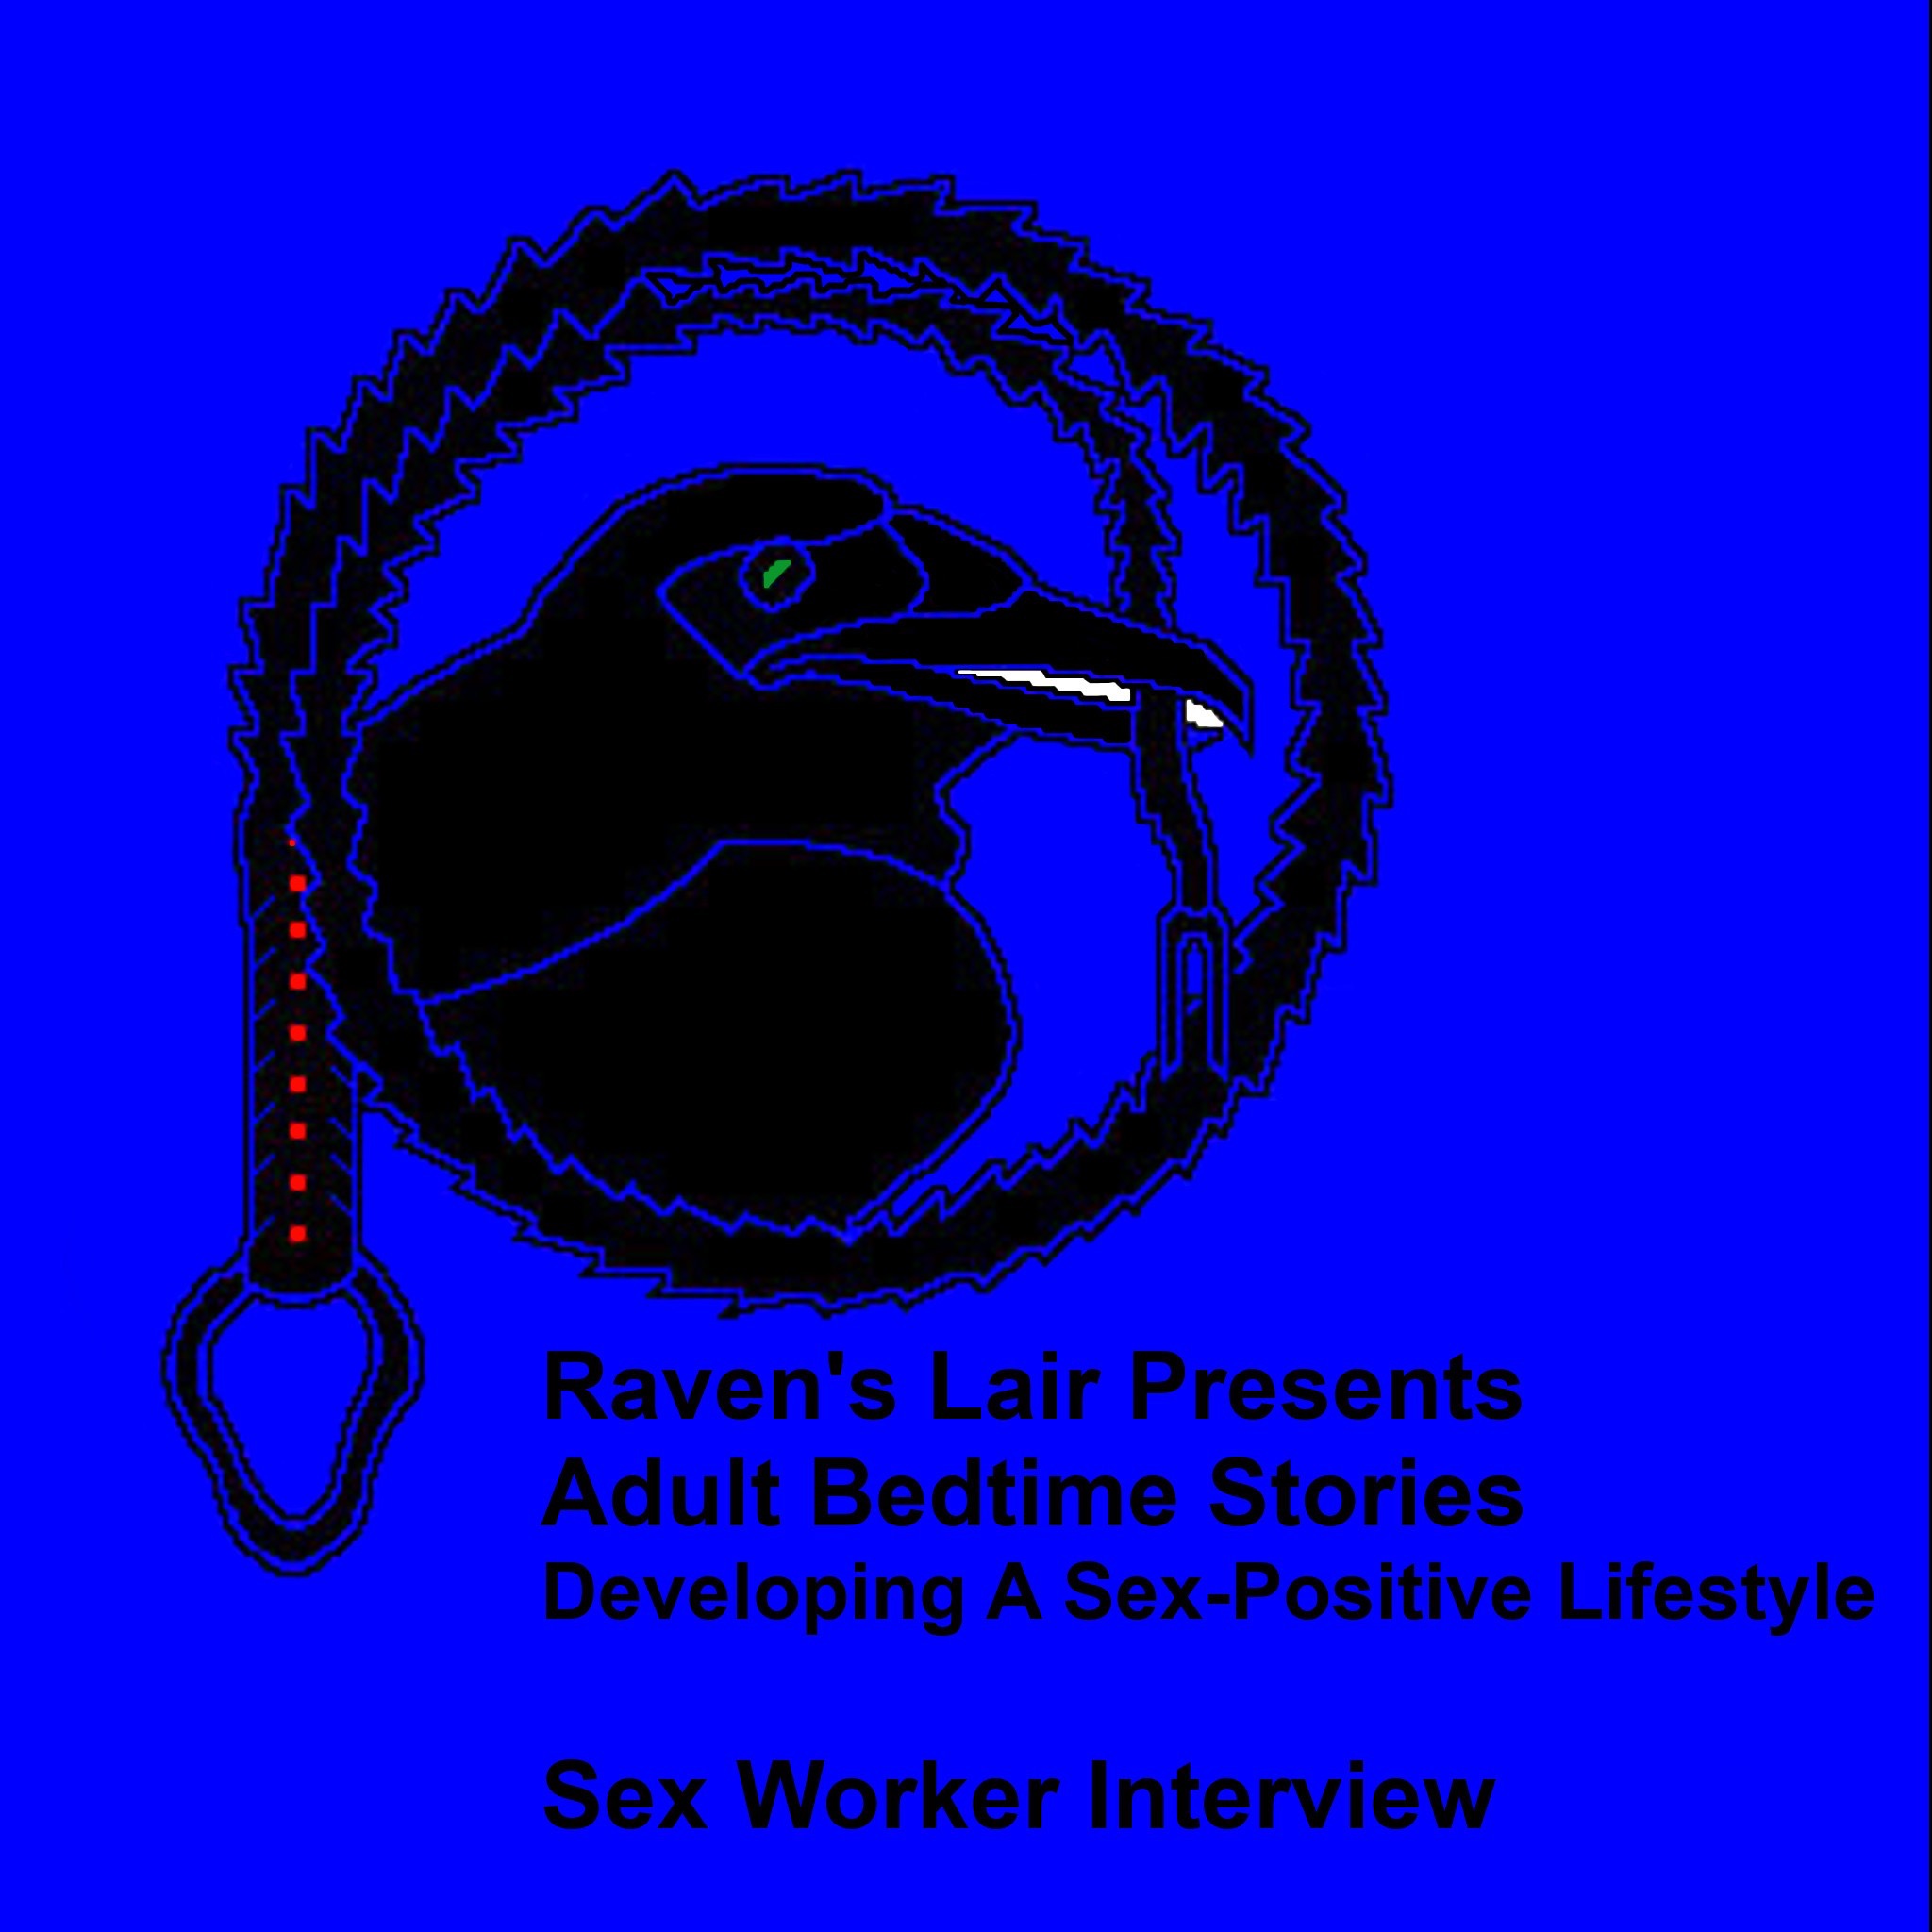 Interview with a Sex Worker